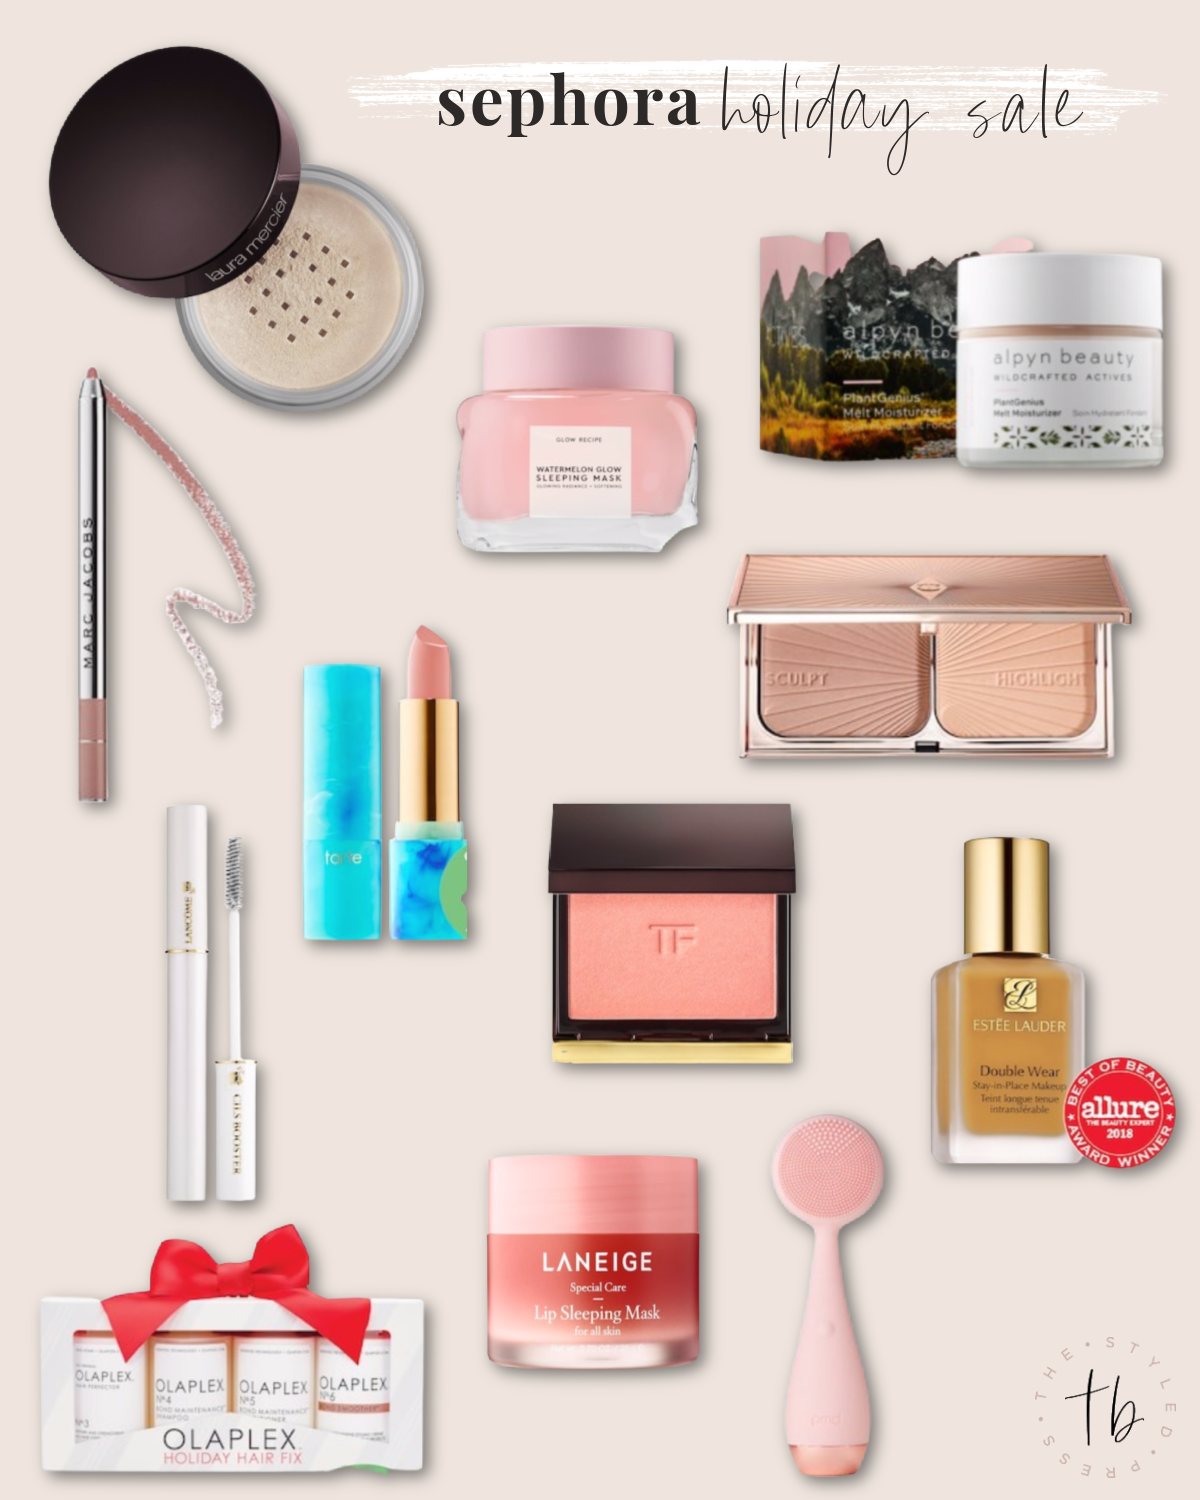 Sephora Holiday Savings Event 2020 - The Styled Press